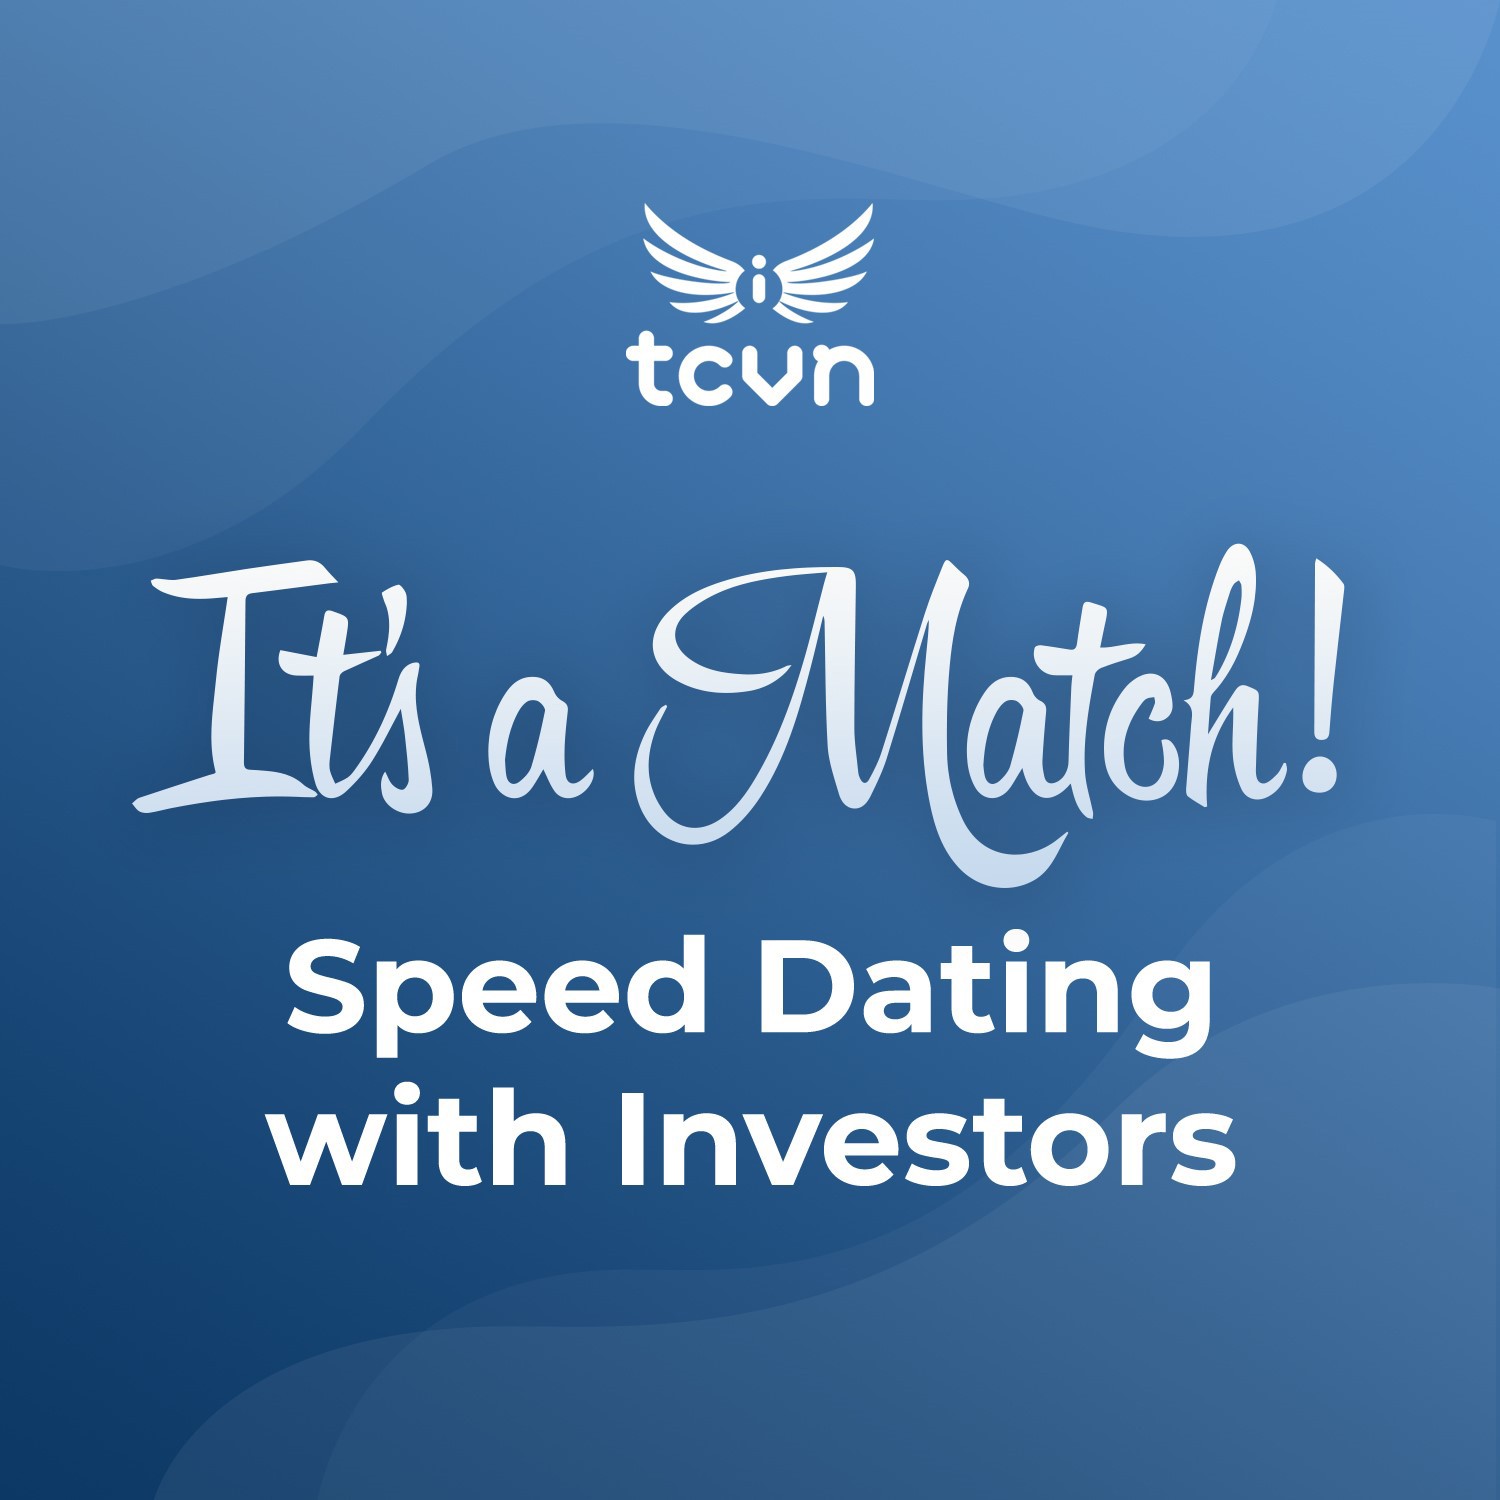 2019 Investor Speed Dating – TCVN Event on March 21